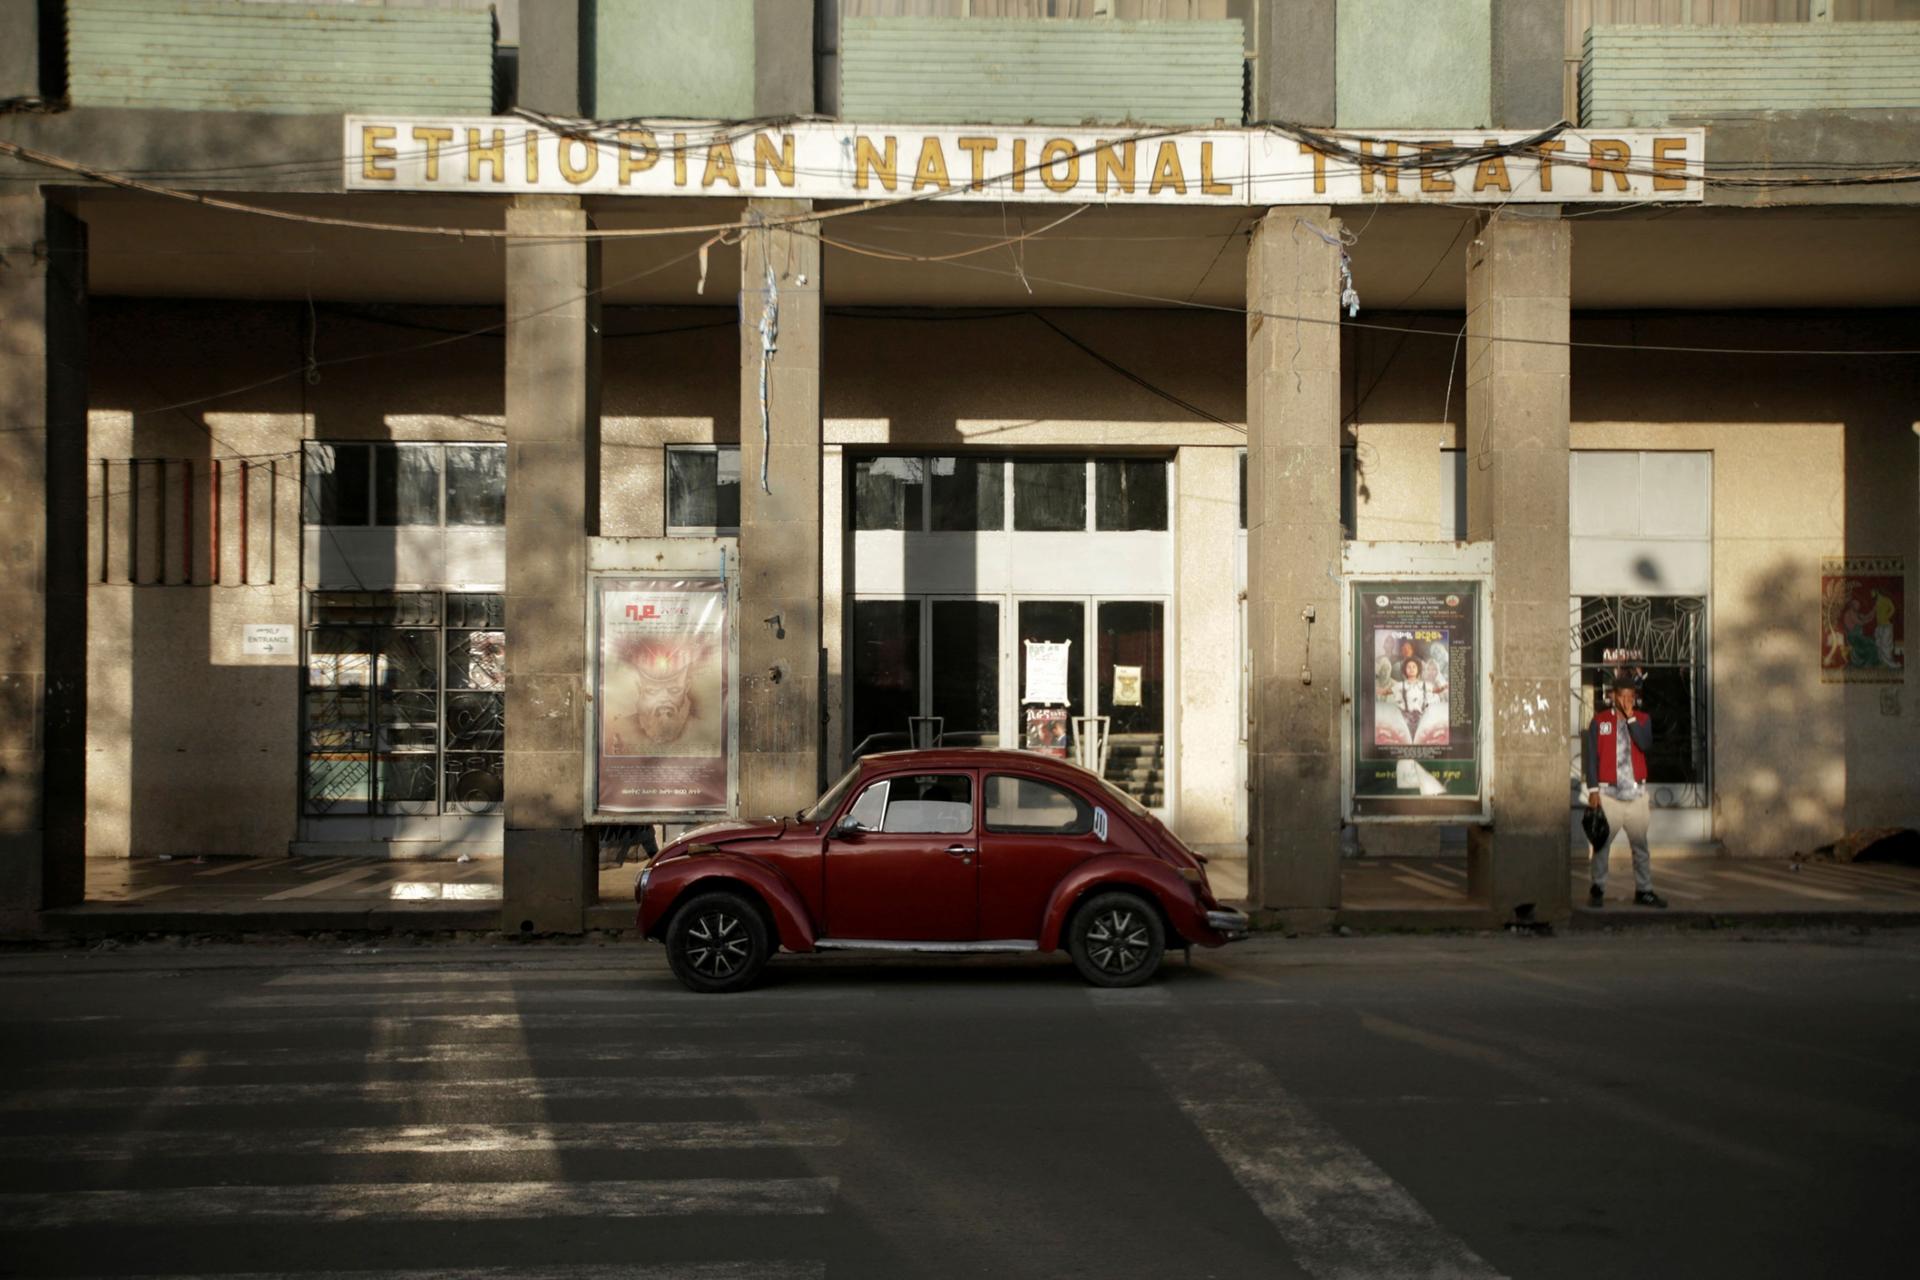 A red Volkswagen Beetle is show parked in front of the tall columns of the Ethiopian National Theatre.